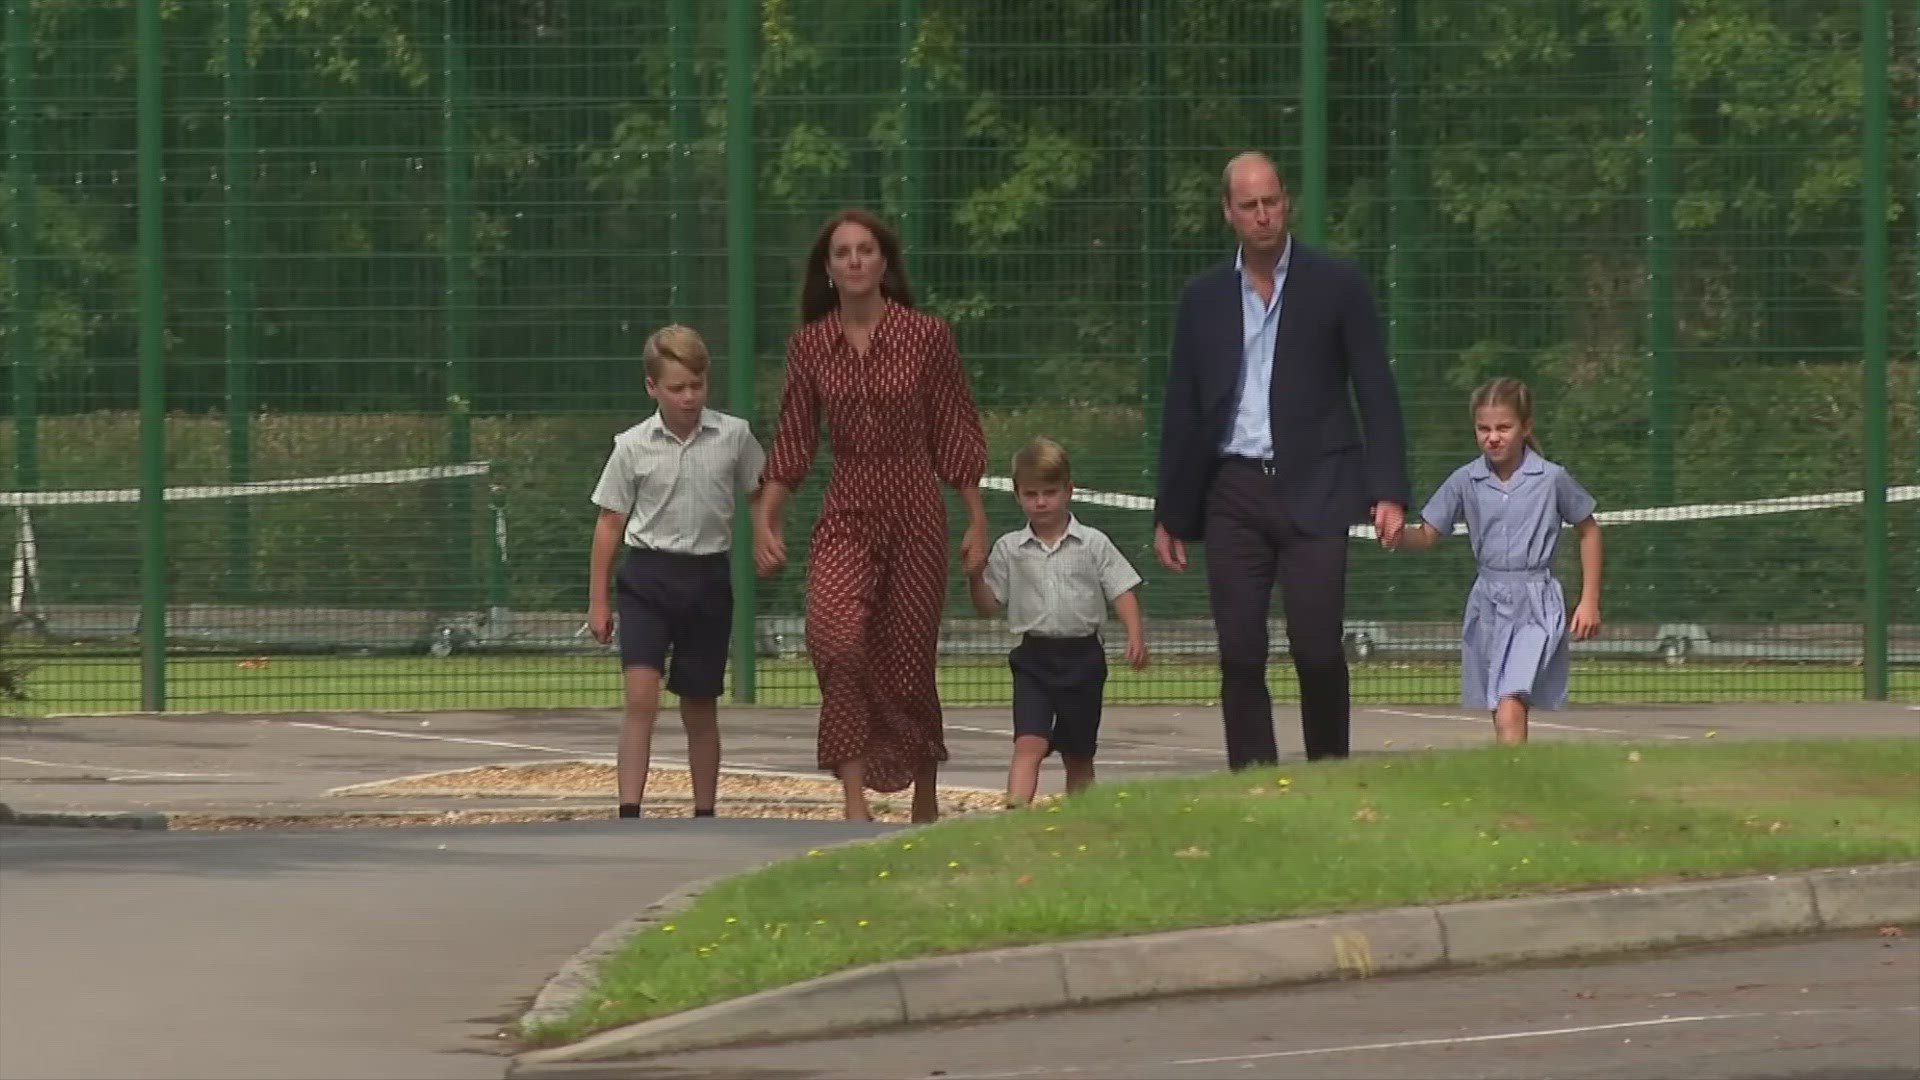 Prince William has made this change for his household staff. Buzz60's Keri Lumm reports.